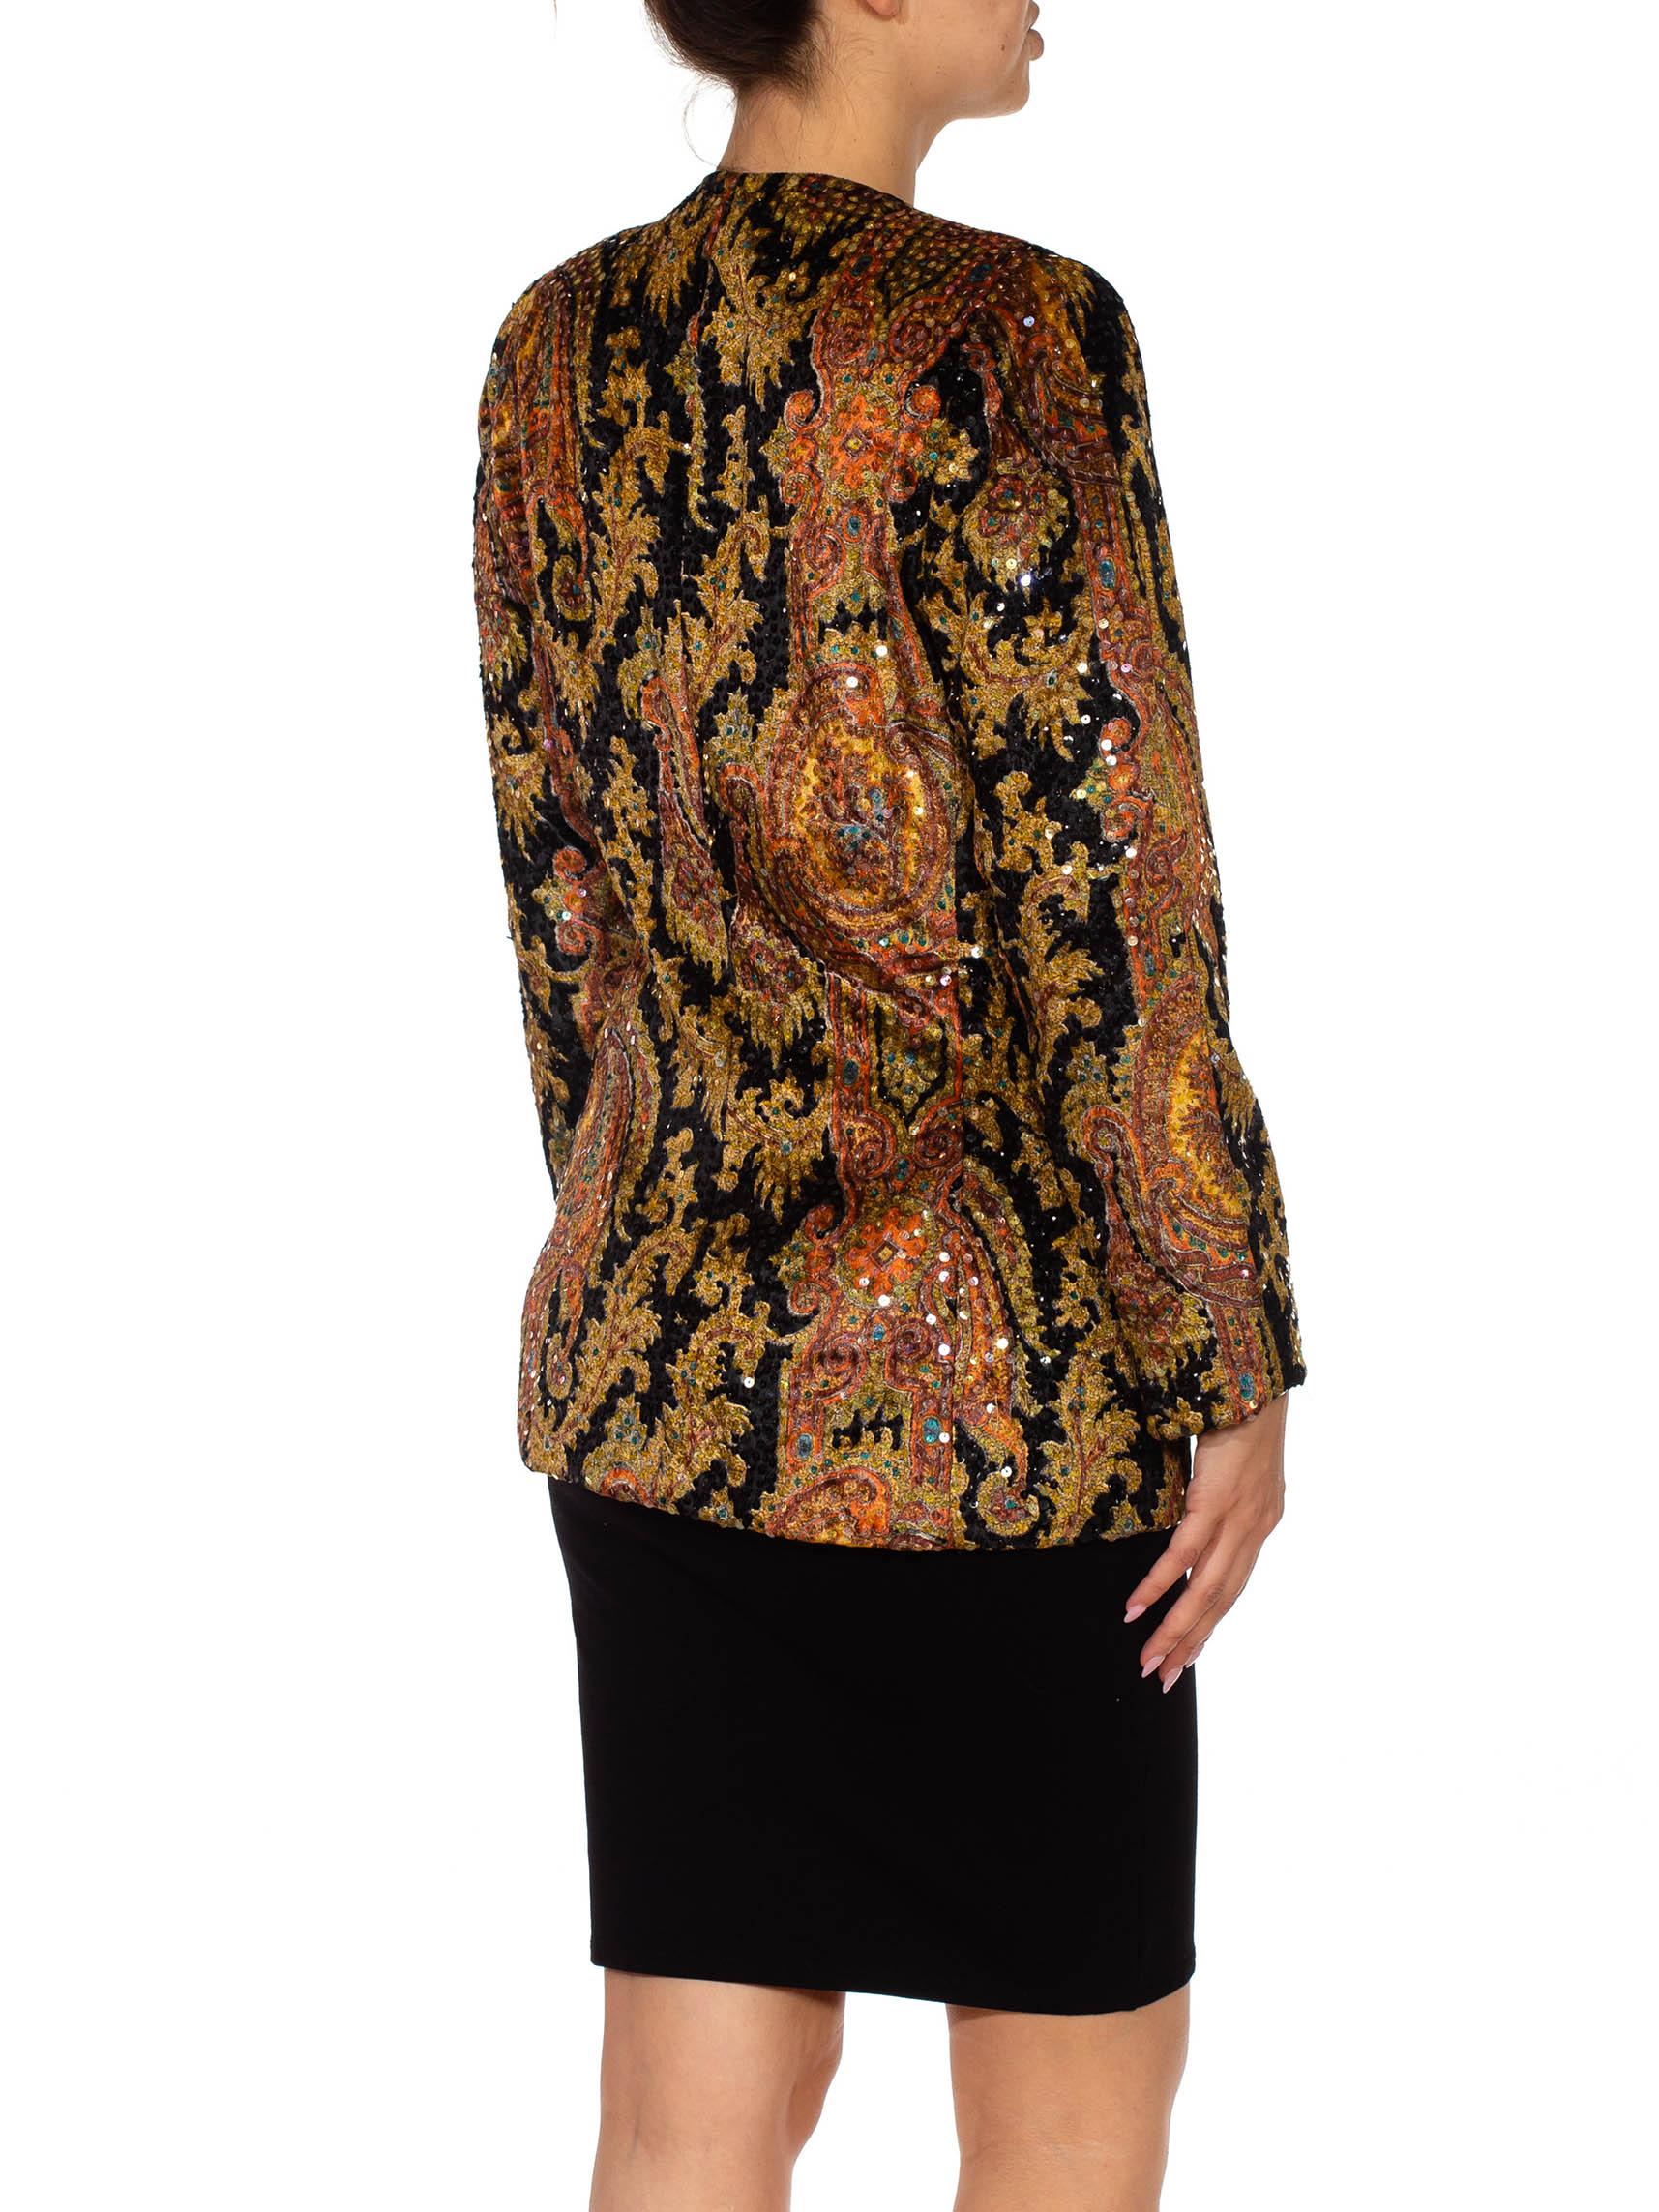 1980S BILL BLASS Black Paisley Silk Velvet Couture Hand Beaded Sequin Jacket In Excellent Condition For Sale In New York, NY